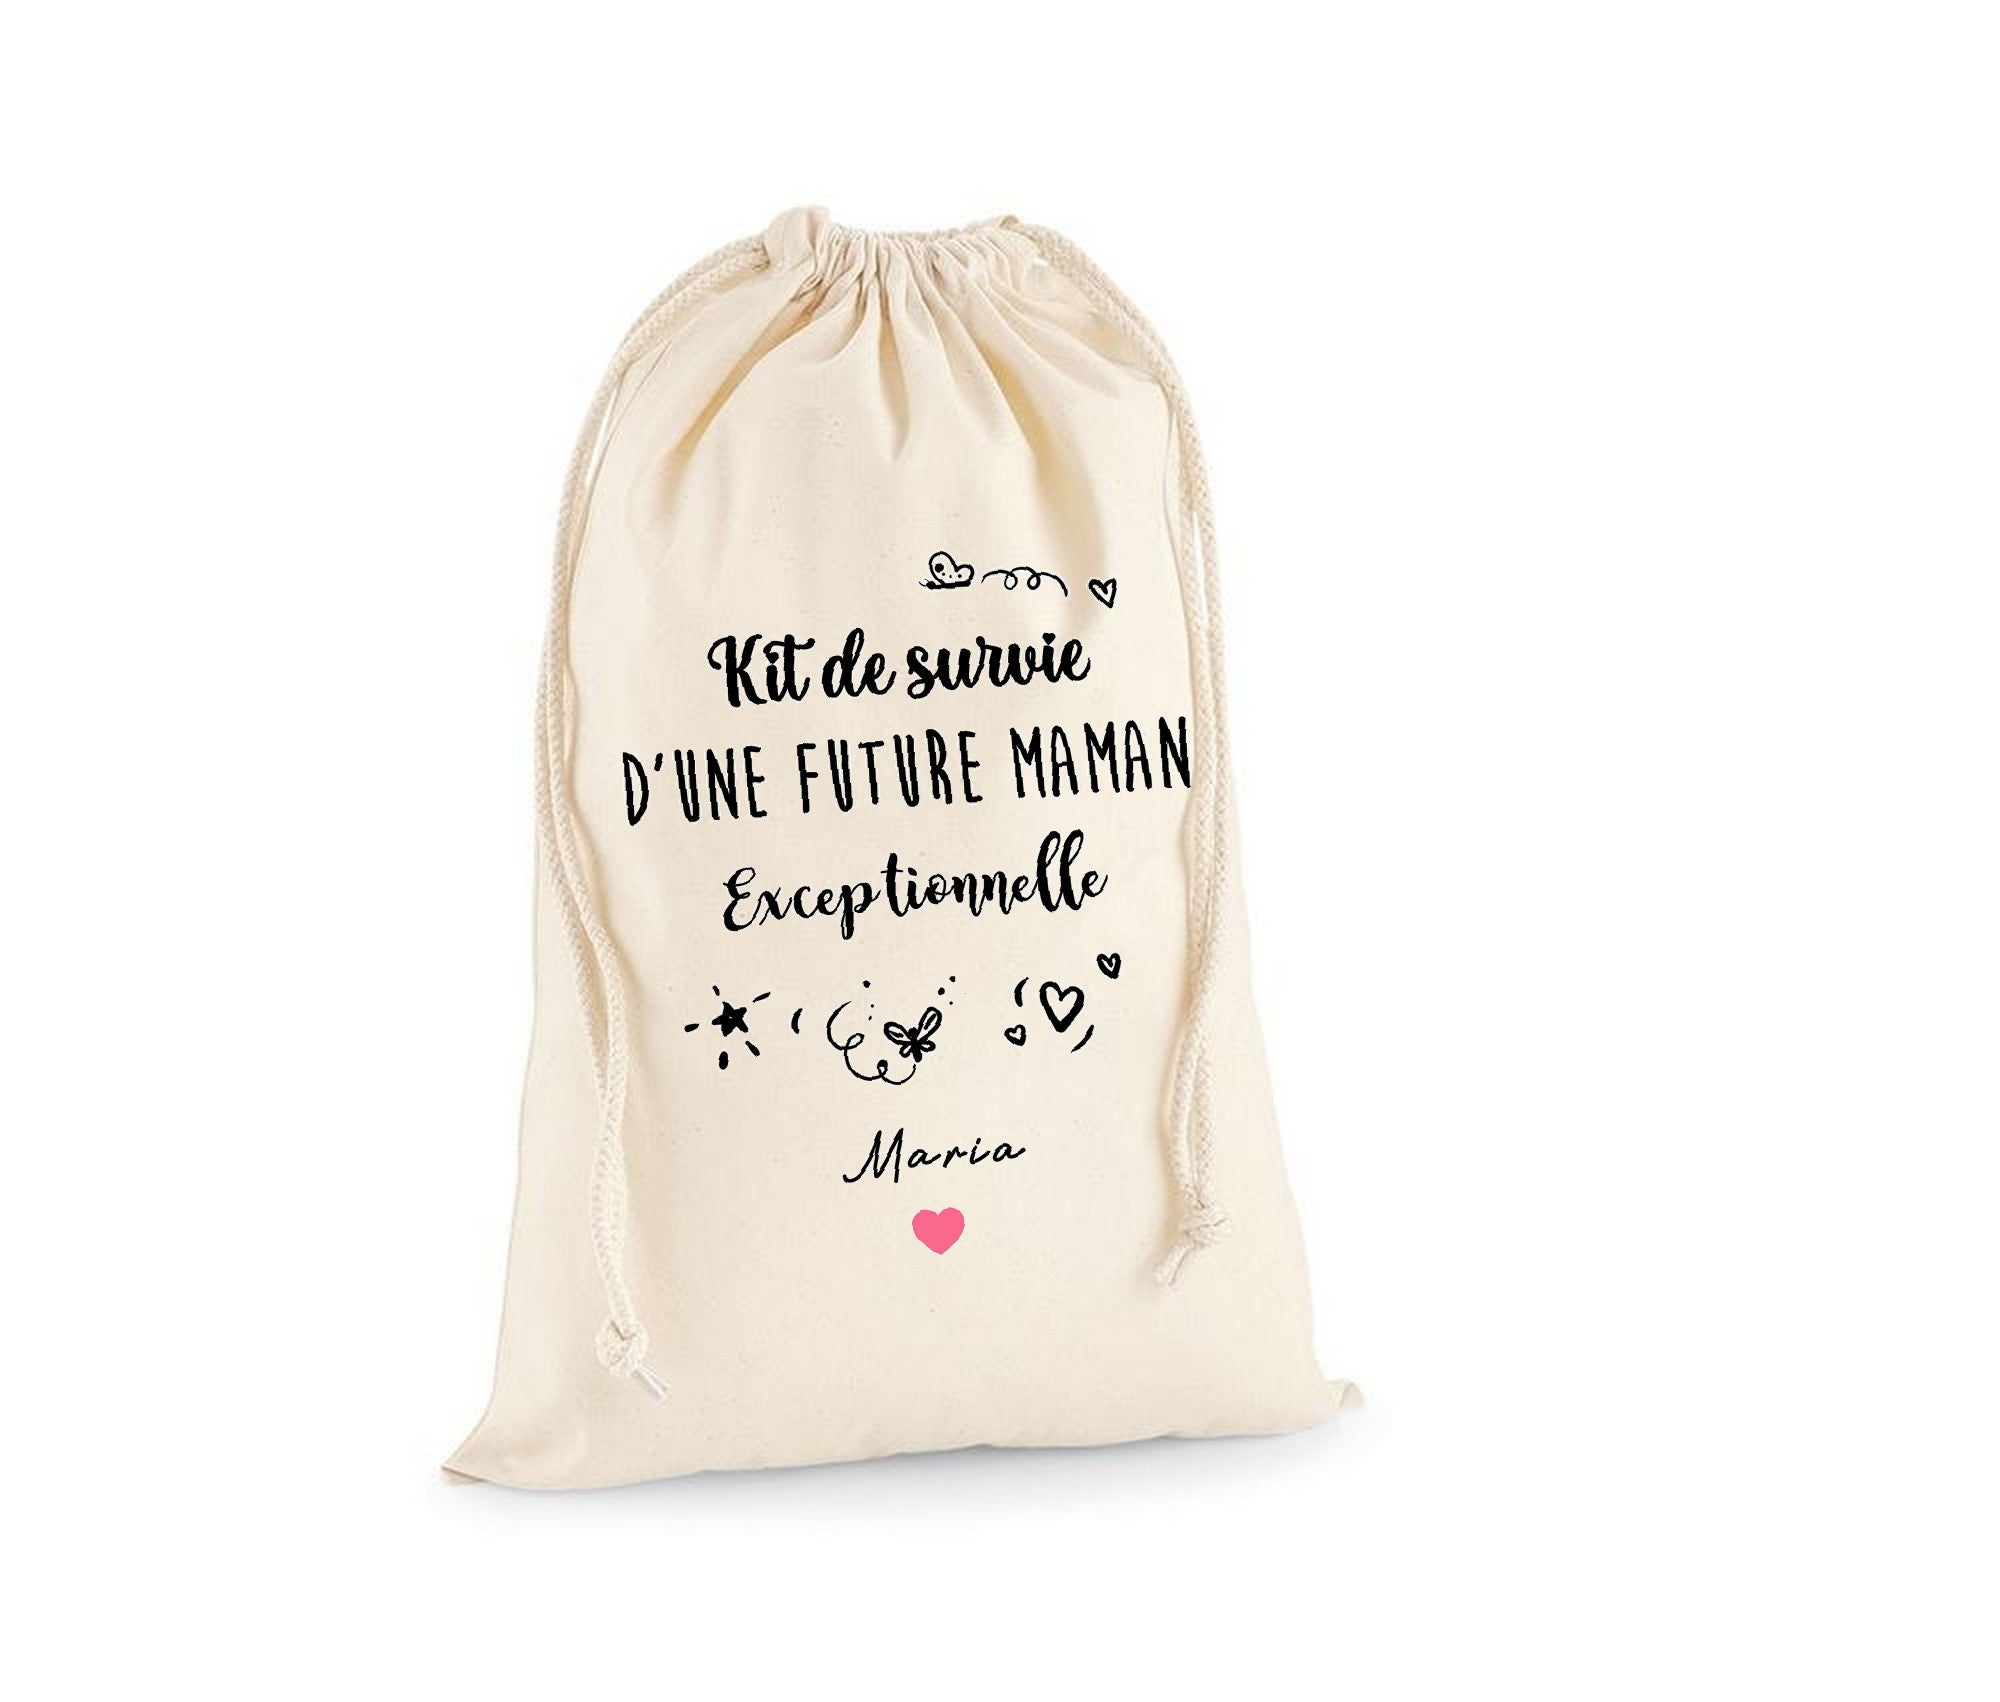 Kit survie future maman – Cool and the bag